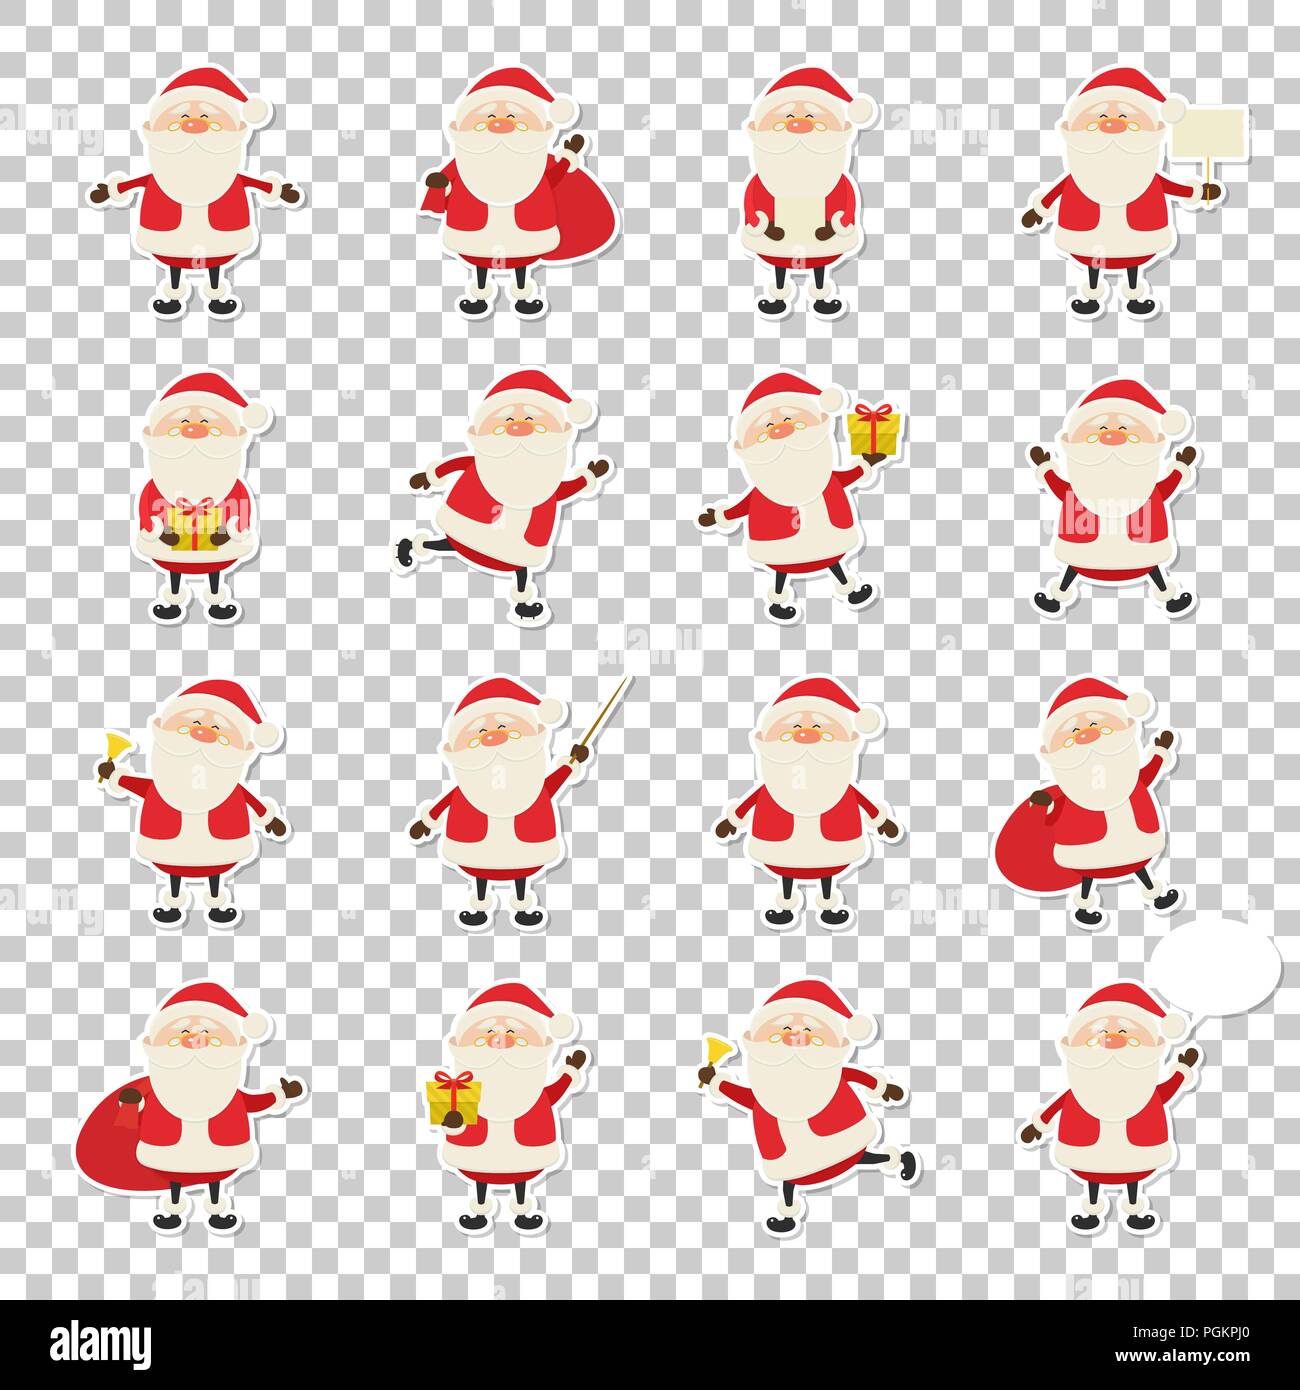 Cute vector Santa Claus paper sticker icon set in flat style isolated on transparency grid background, christmas collection, xmas and New year 2019 character in different poses. Funny Santa with different emotions. Design template for graphics Stock Vector